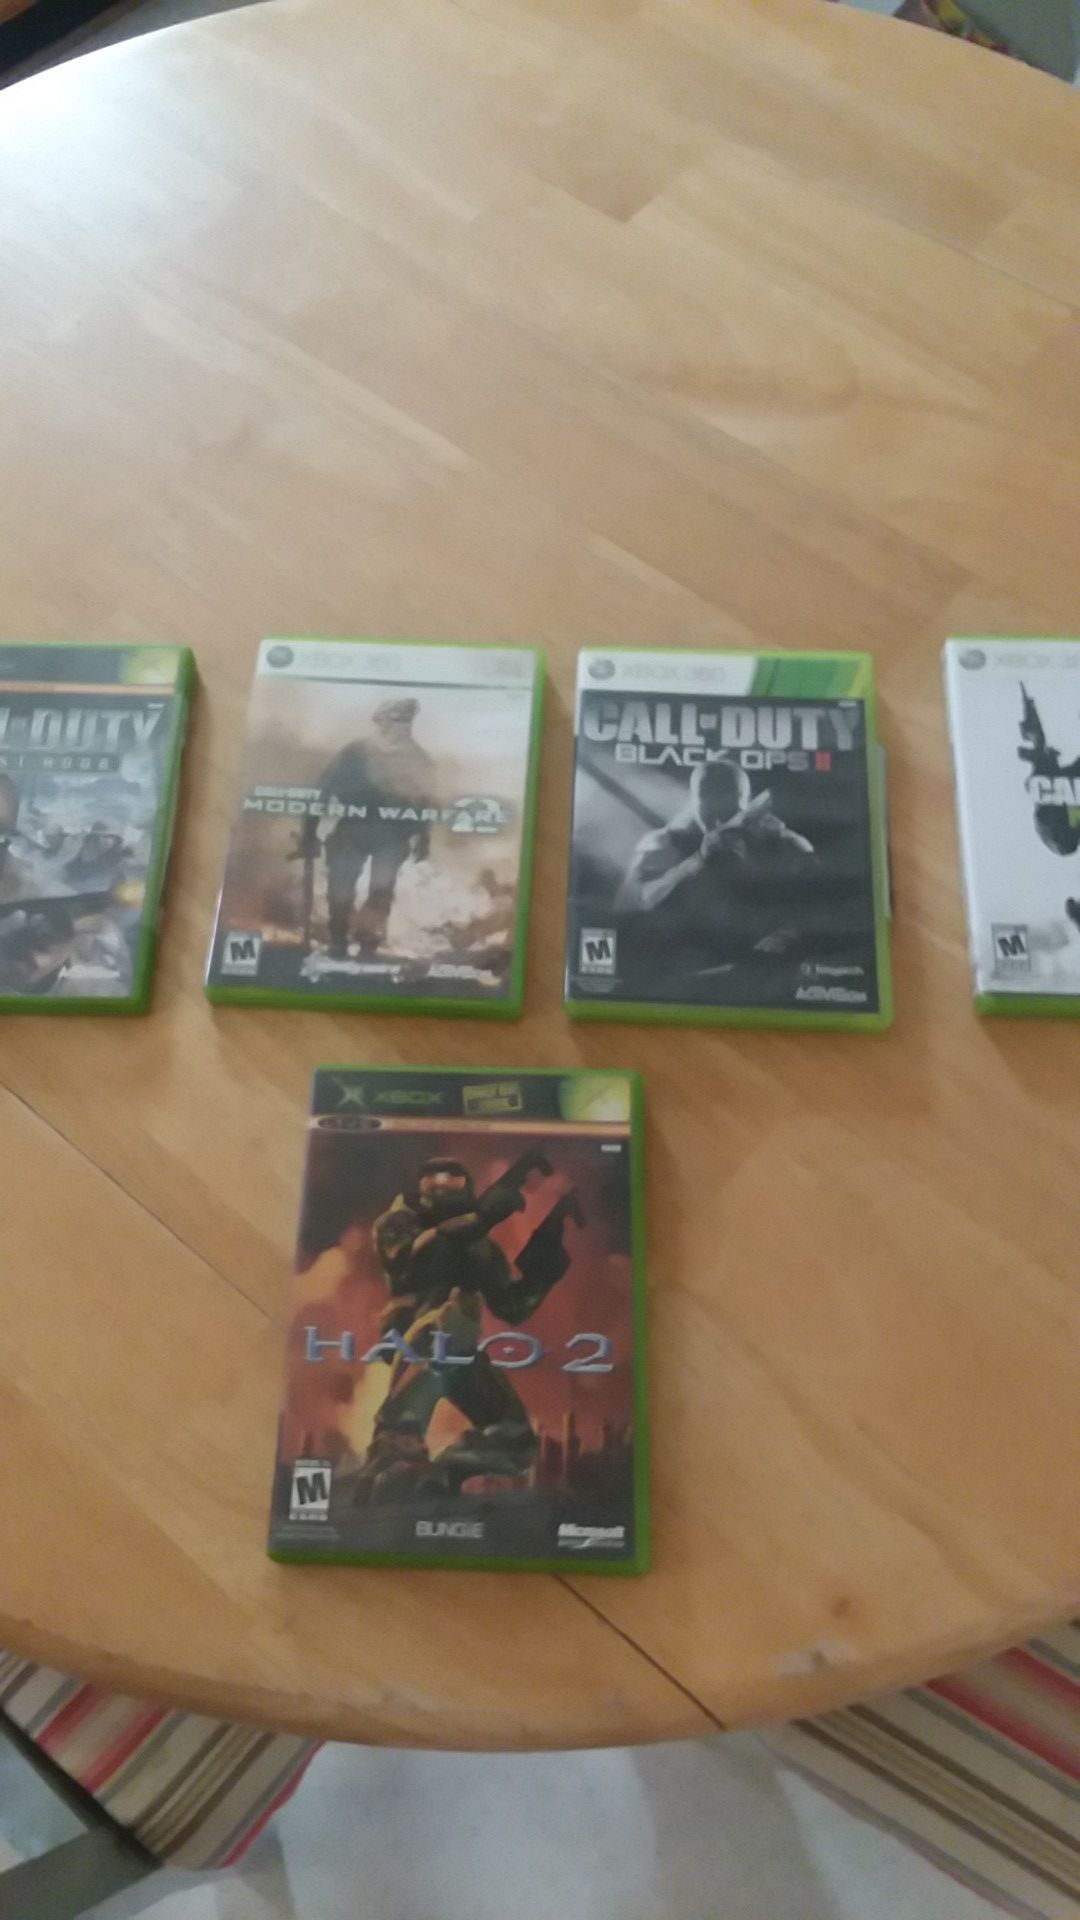 Call of Duty 4 games almost brand-new only been used a couple times